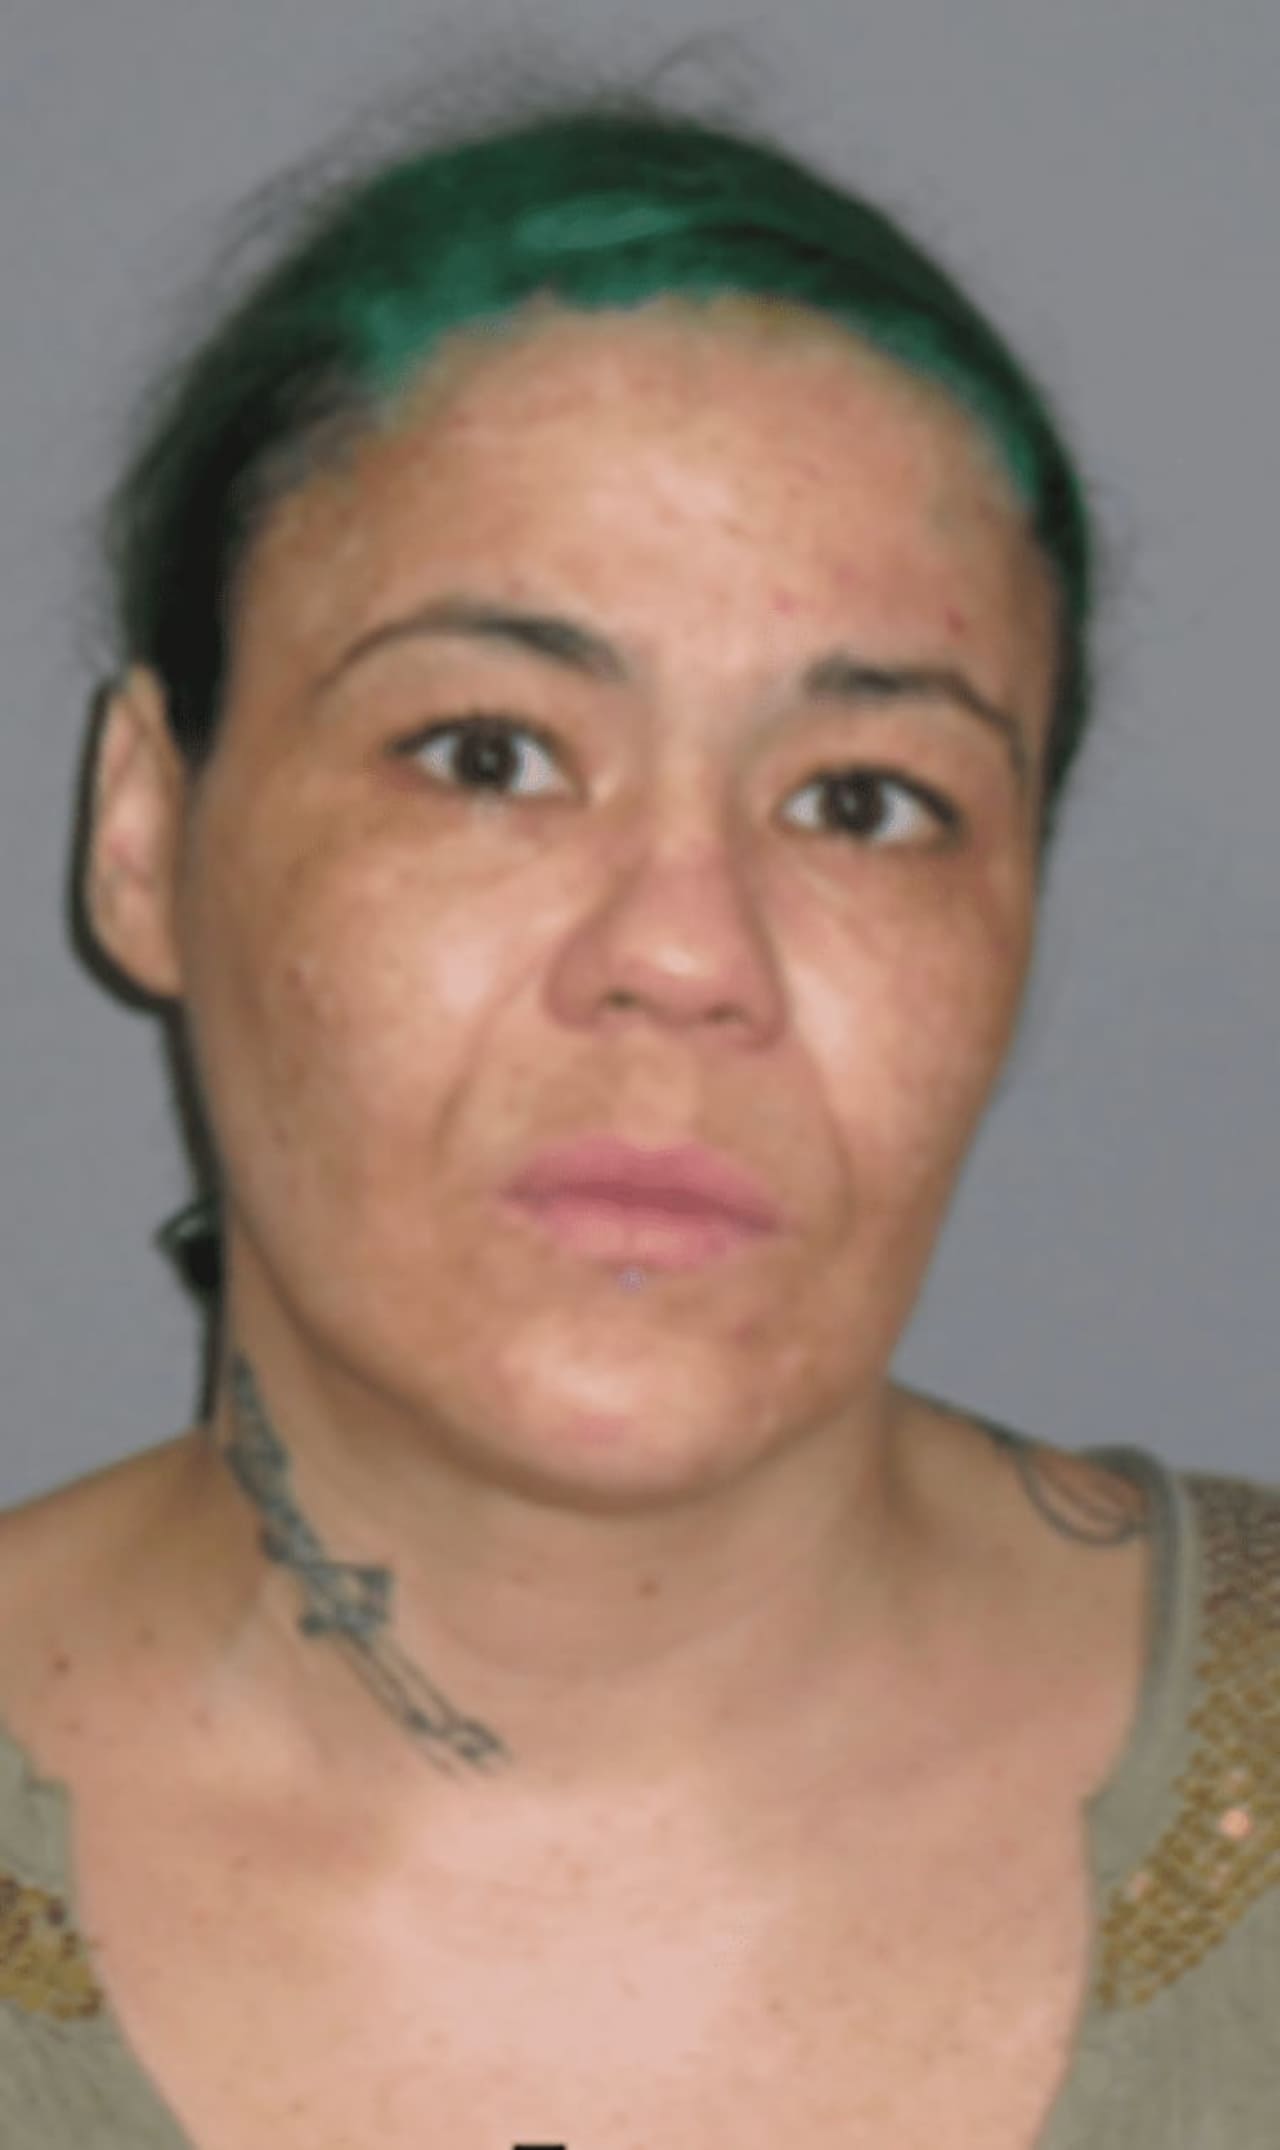 Nicole Doble, 37, of Rhinebeck was charged with first-degree robbery early Monday in Hyde Park in connection with Sunday night's holdup of a Citgo gas station on Mill Street.